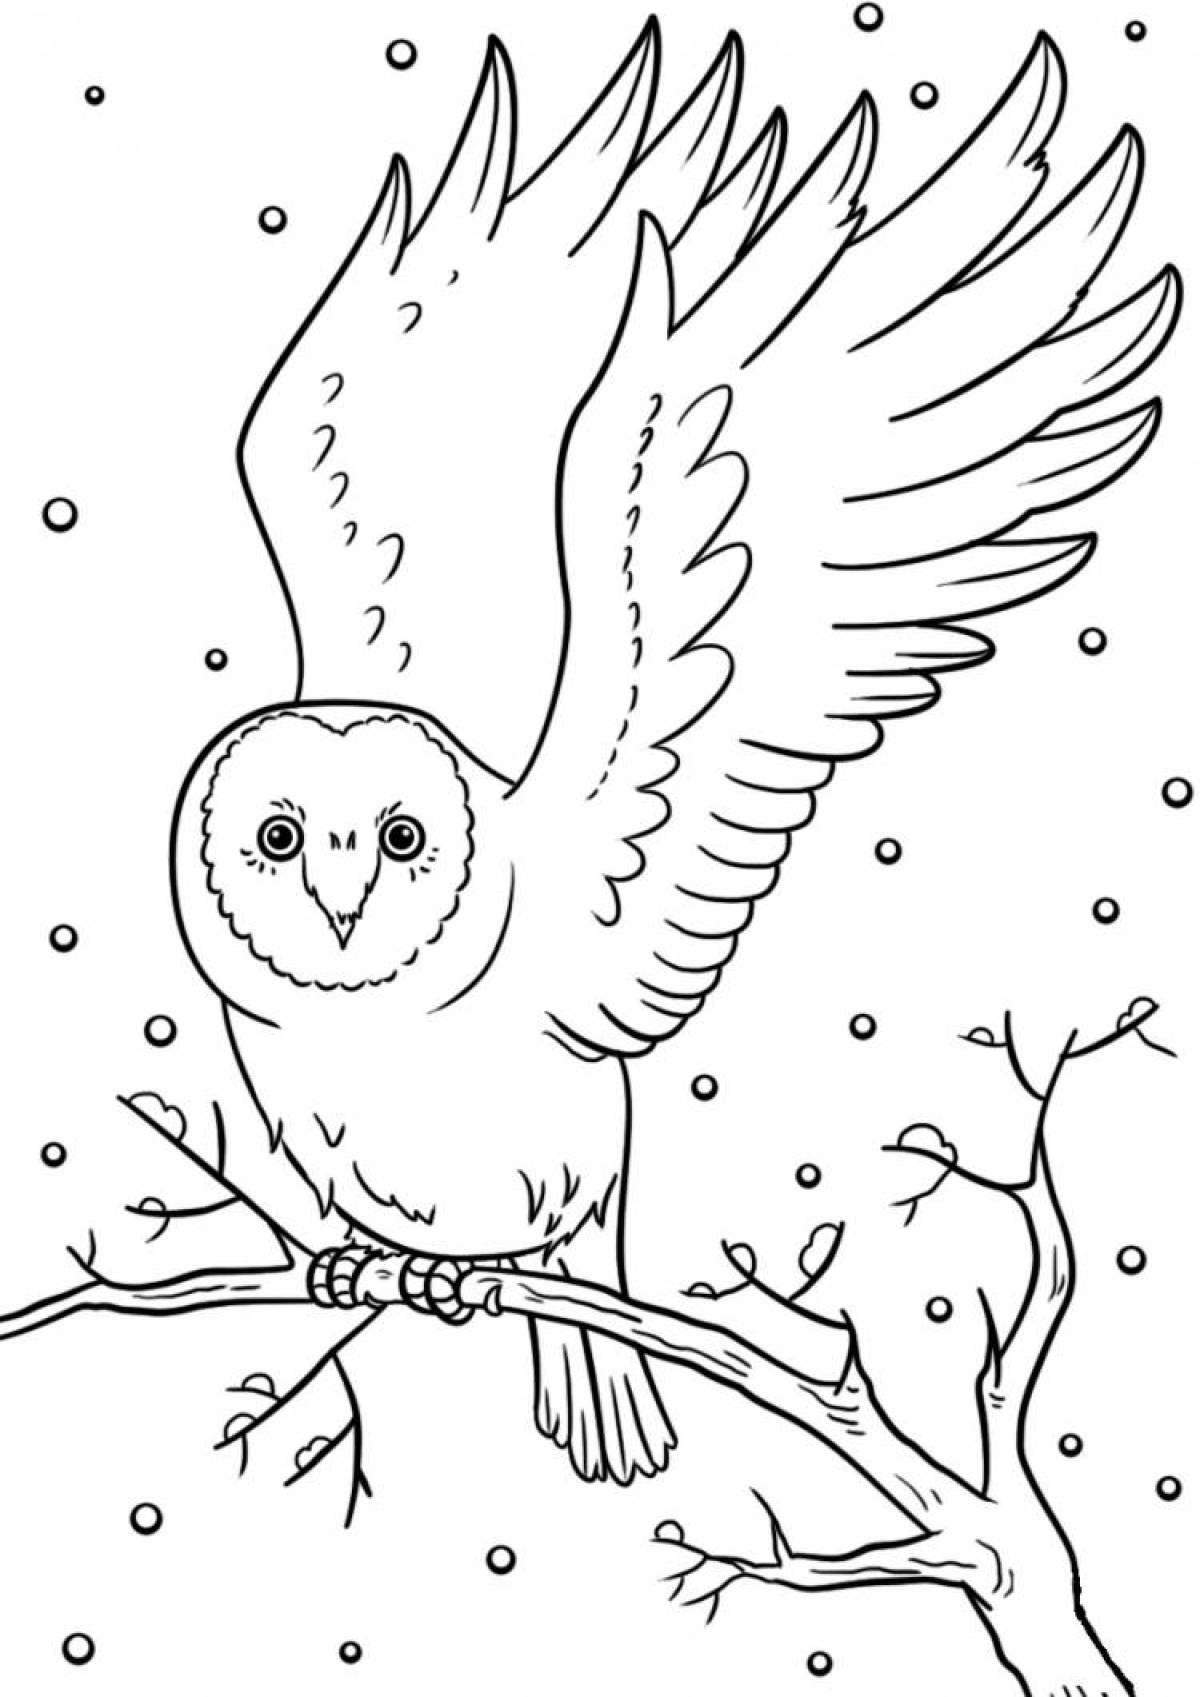 Coloring funny wintering birds for children 4-5 years old